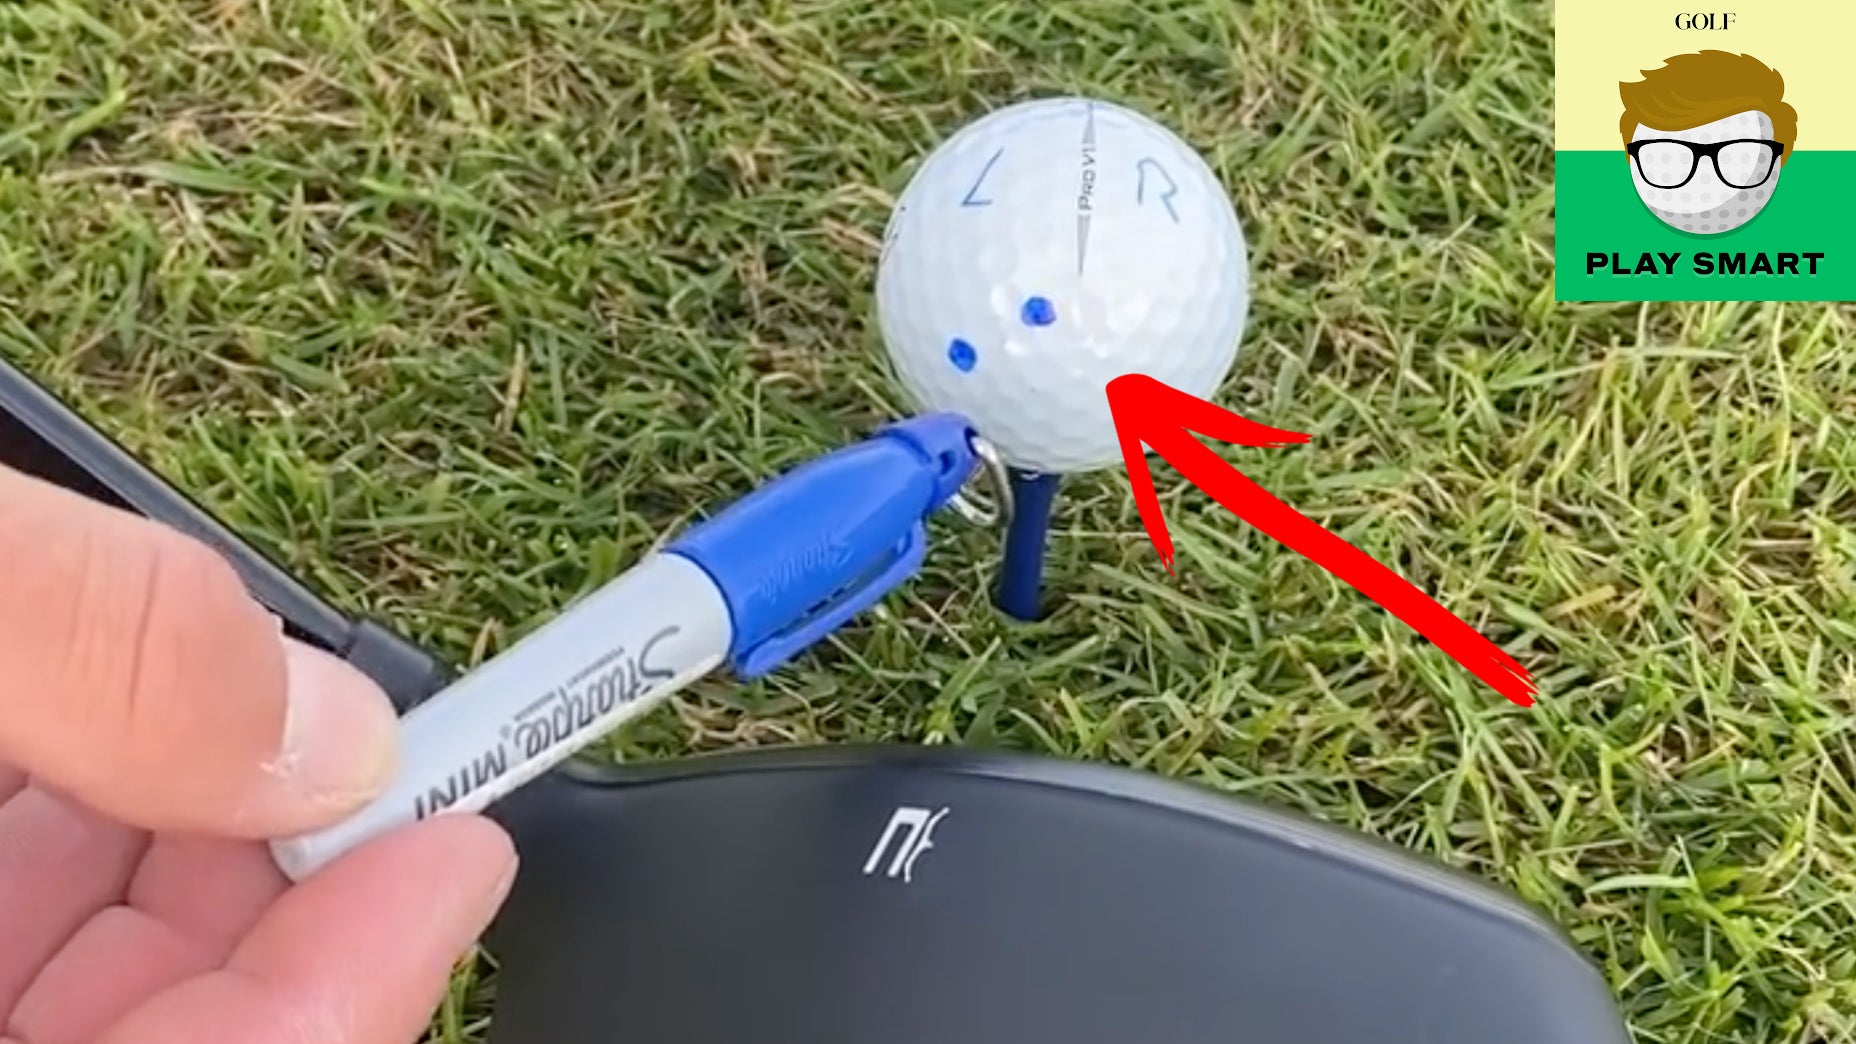 This clever way of marking your golf ball can improve your focus